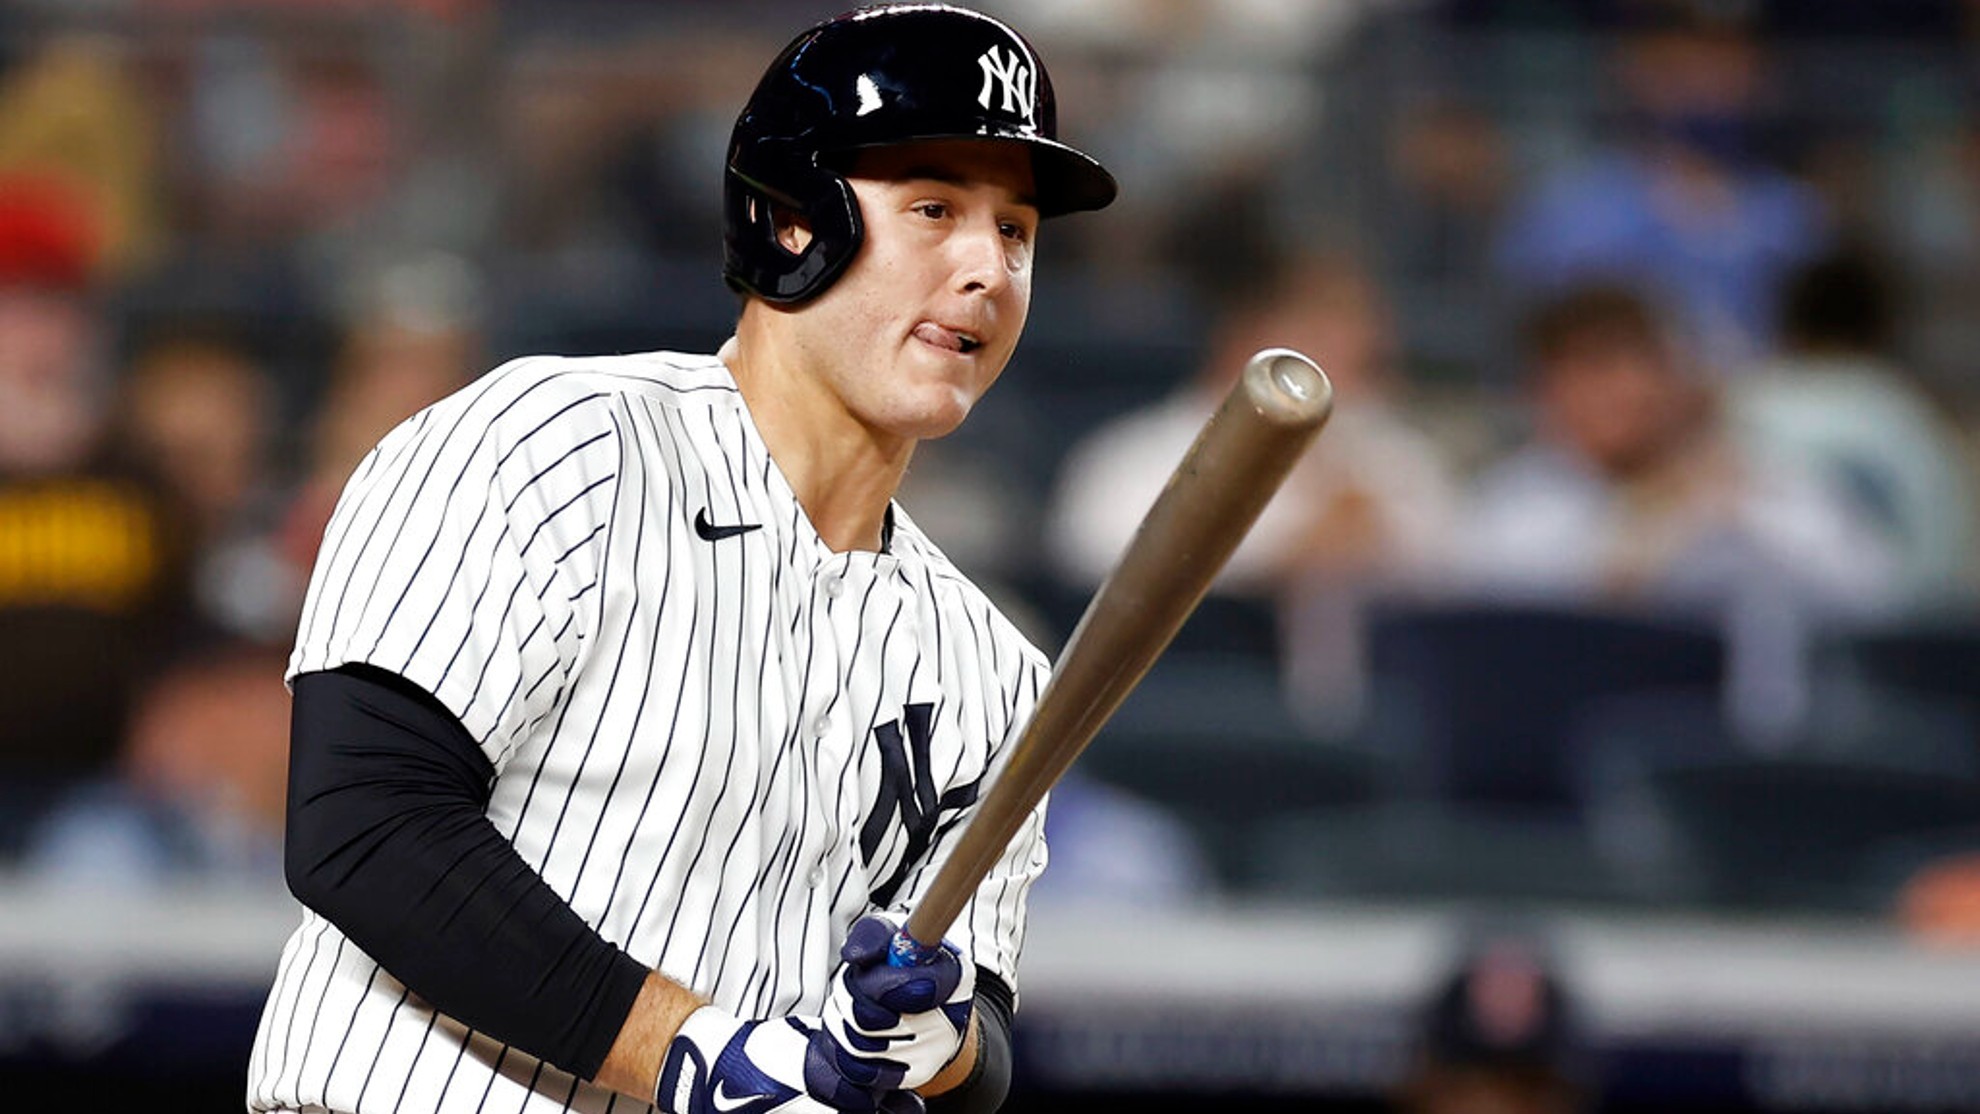 Anthony Rizzo signs for 2 years with the Yankees, but could join...